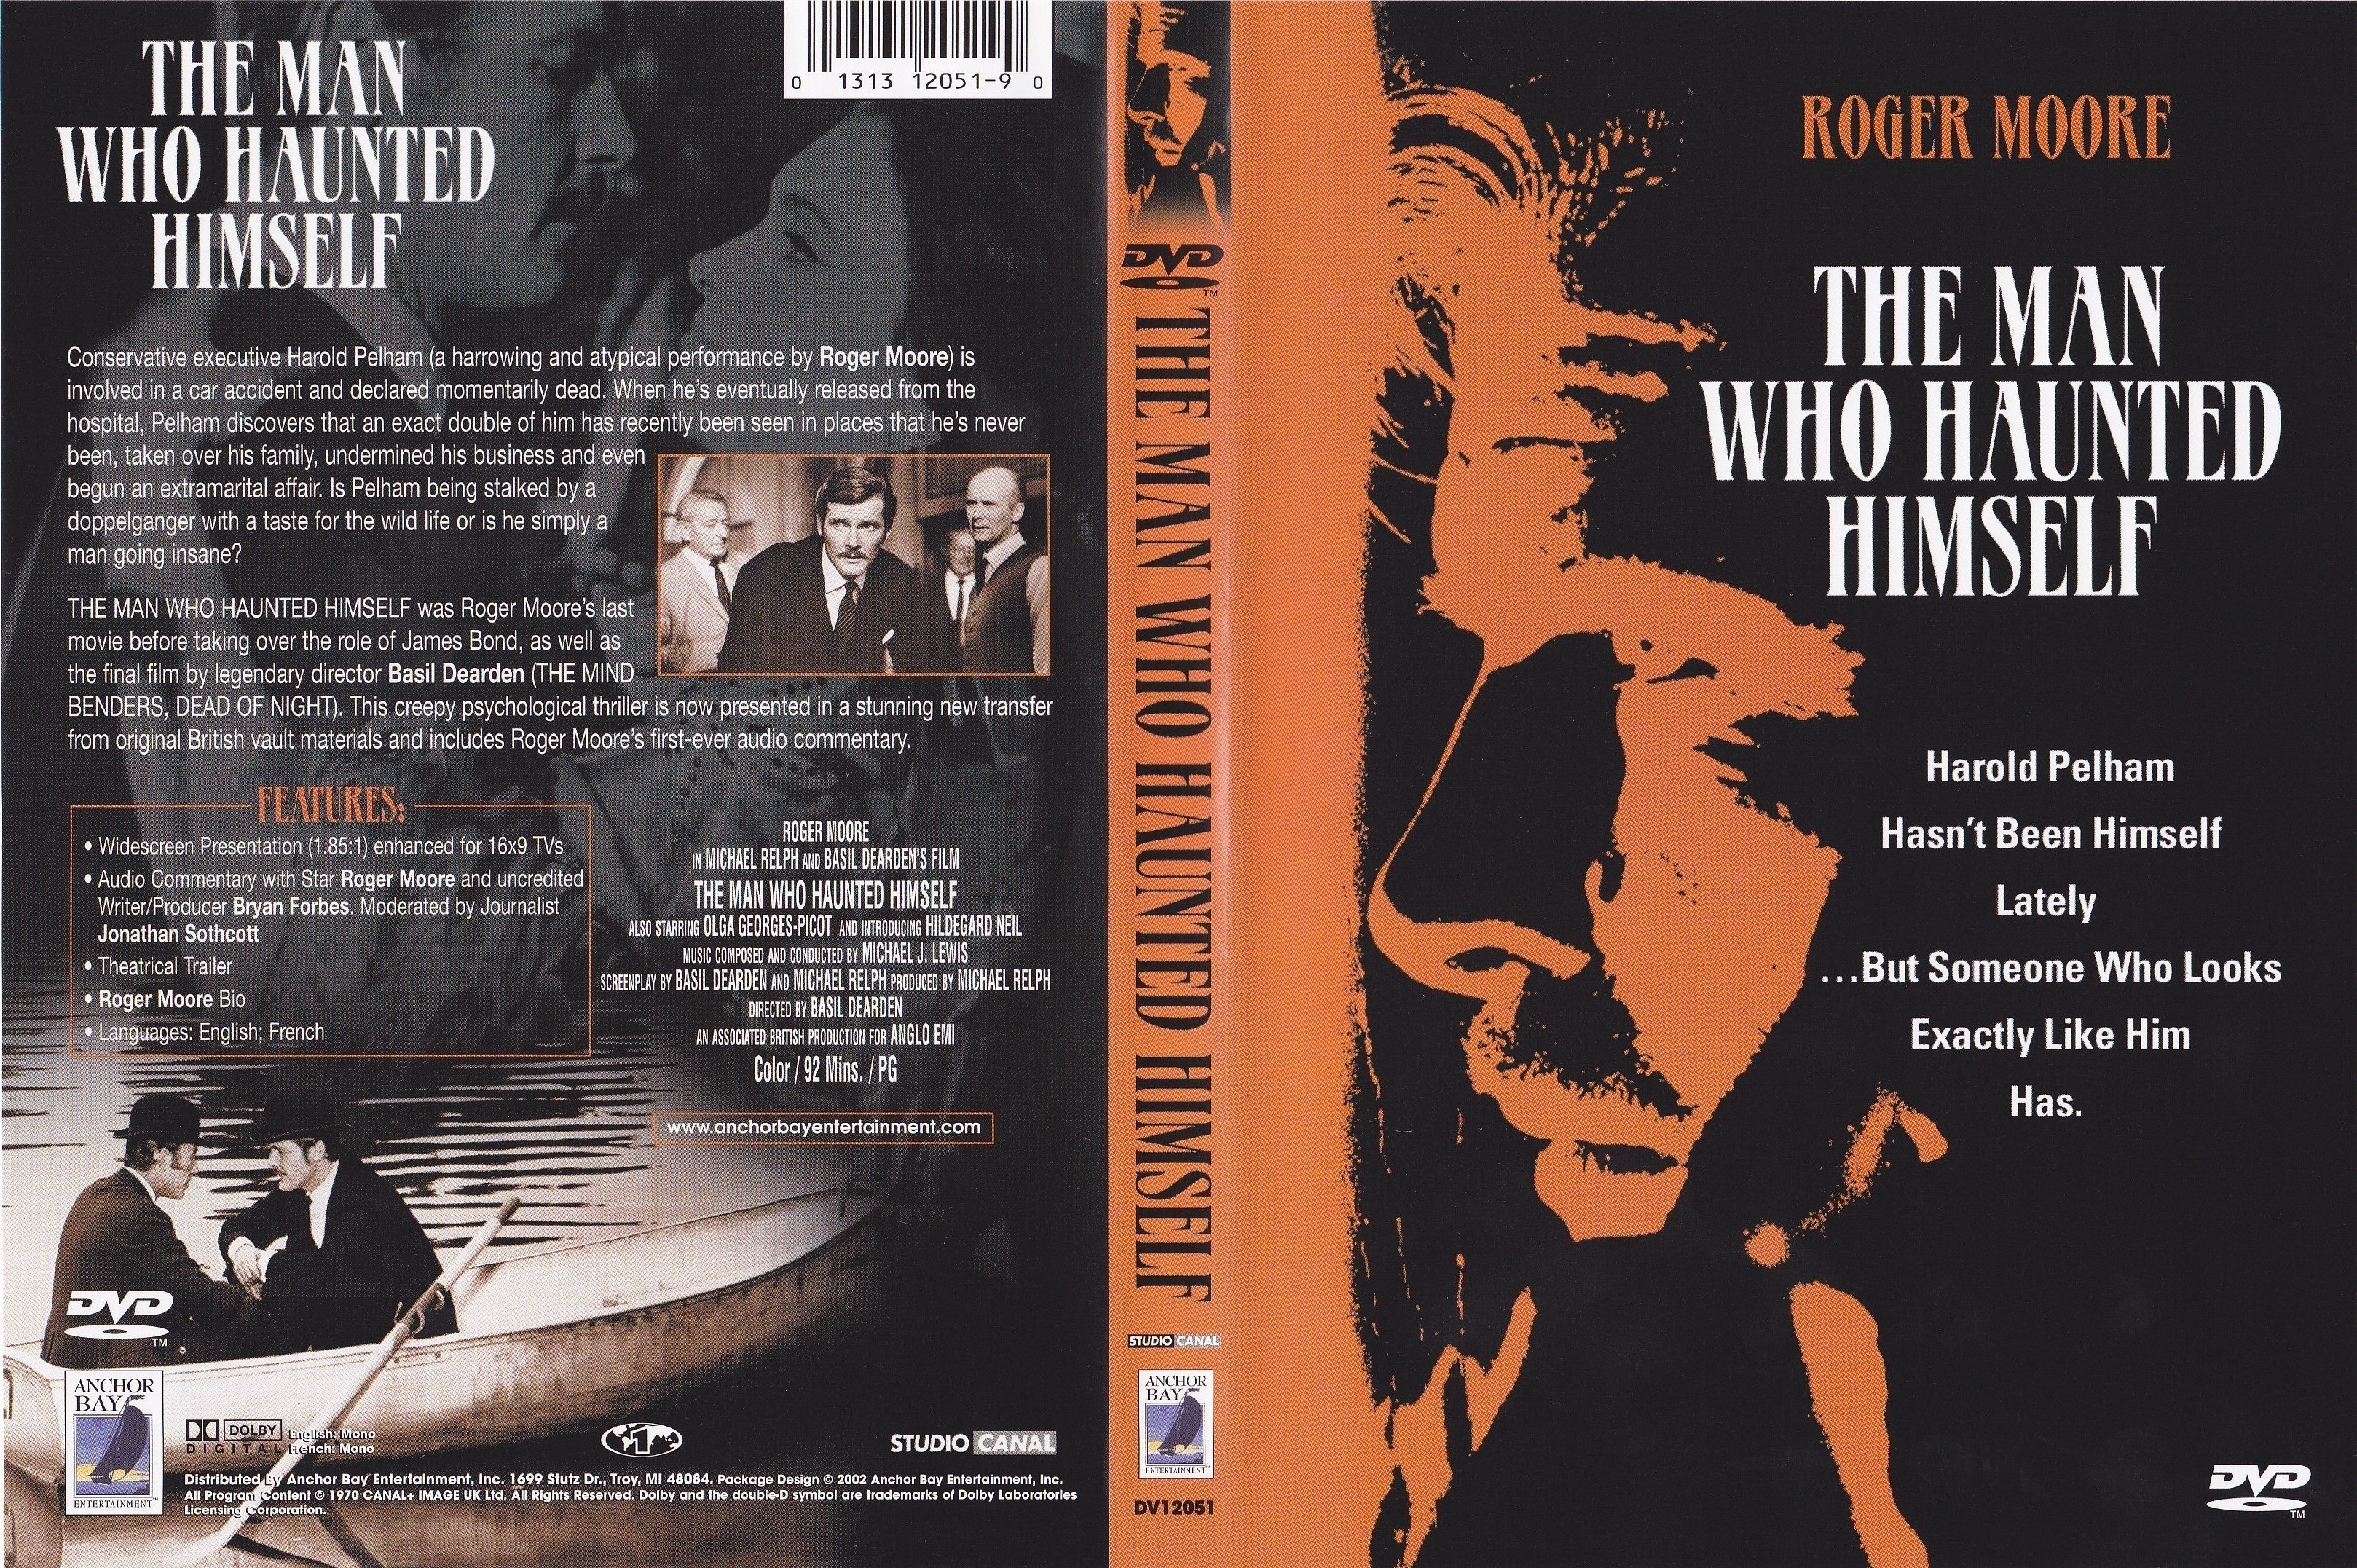 Jaquette DVD The Man Who Haunted Himself Zone 1